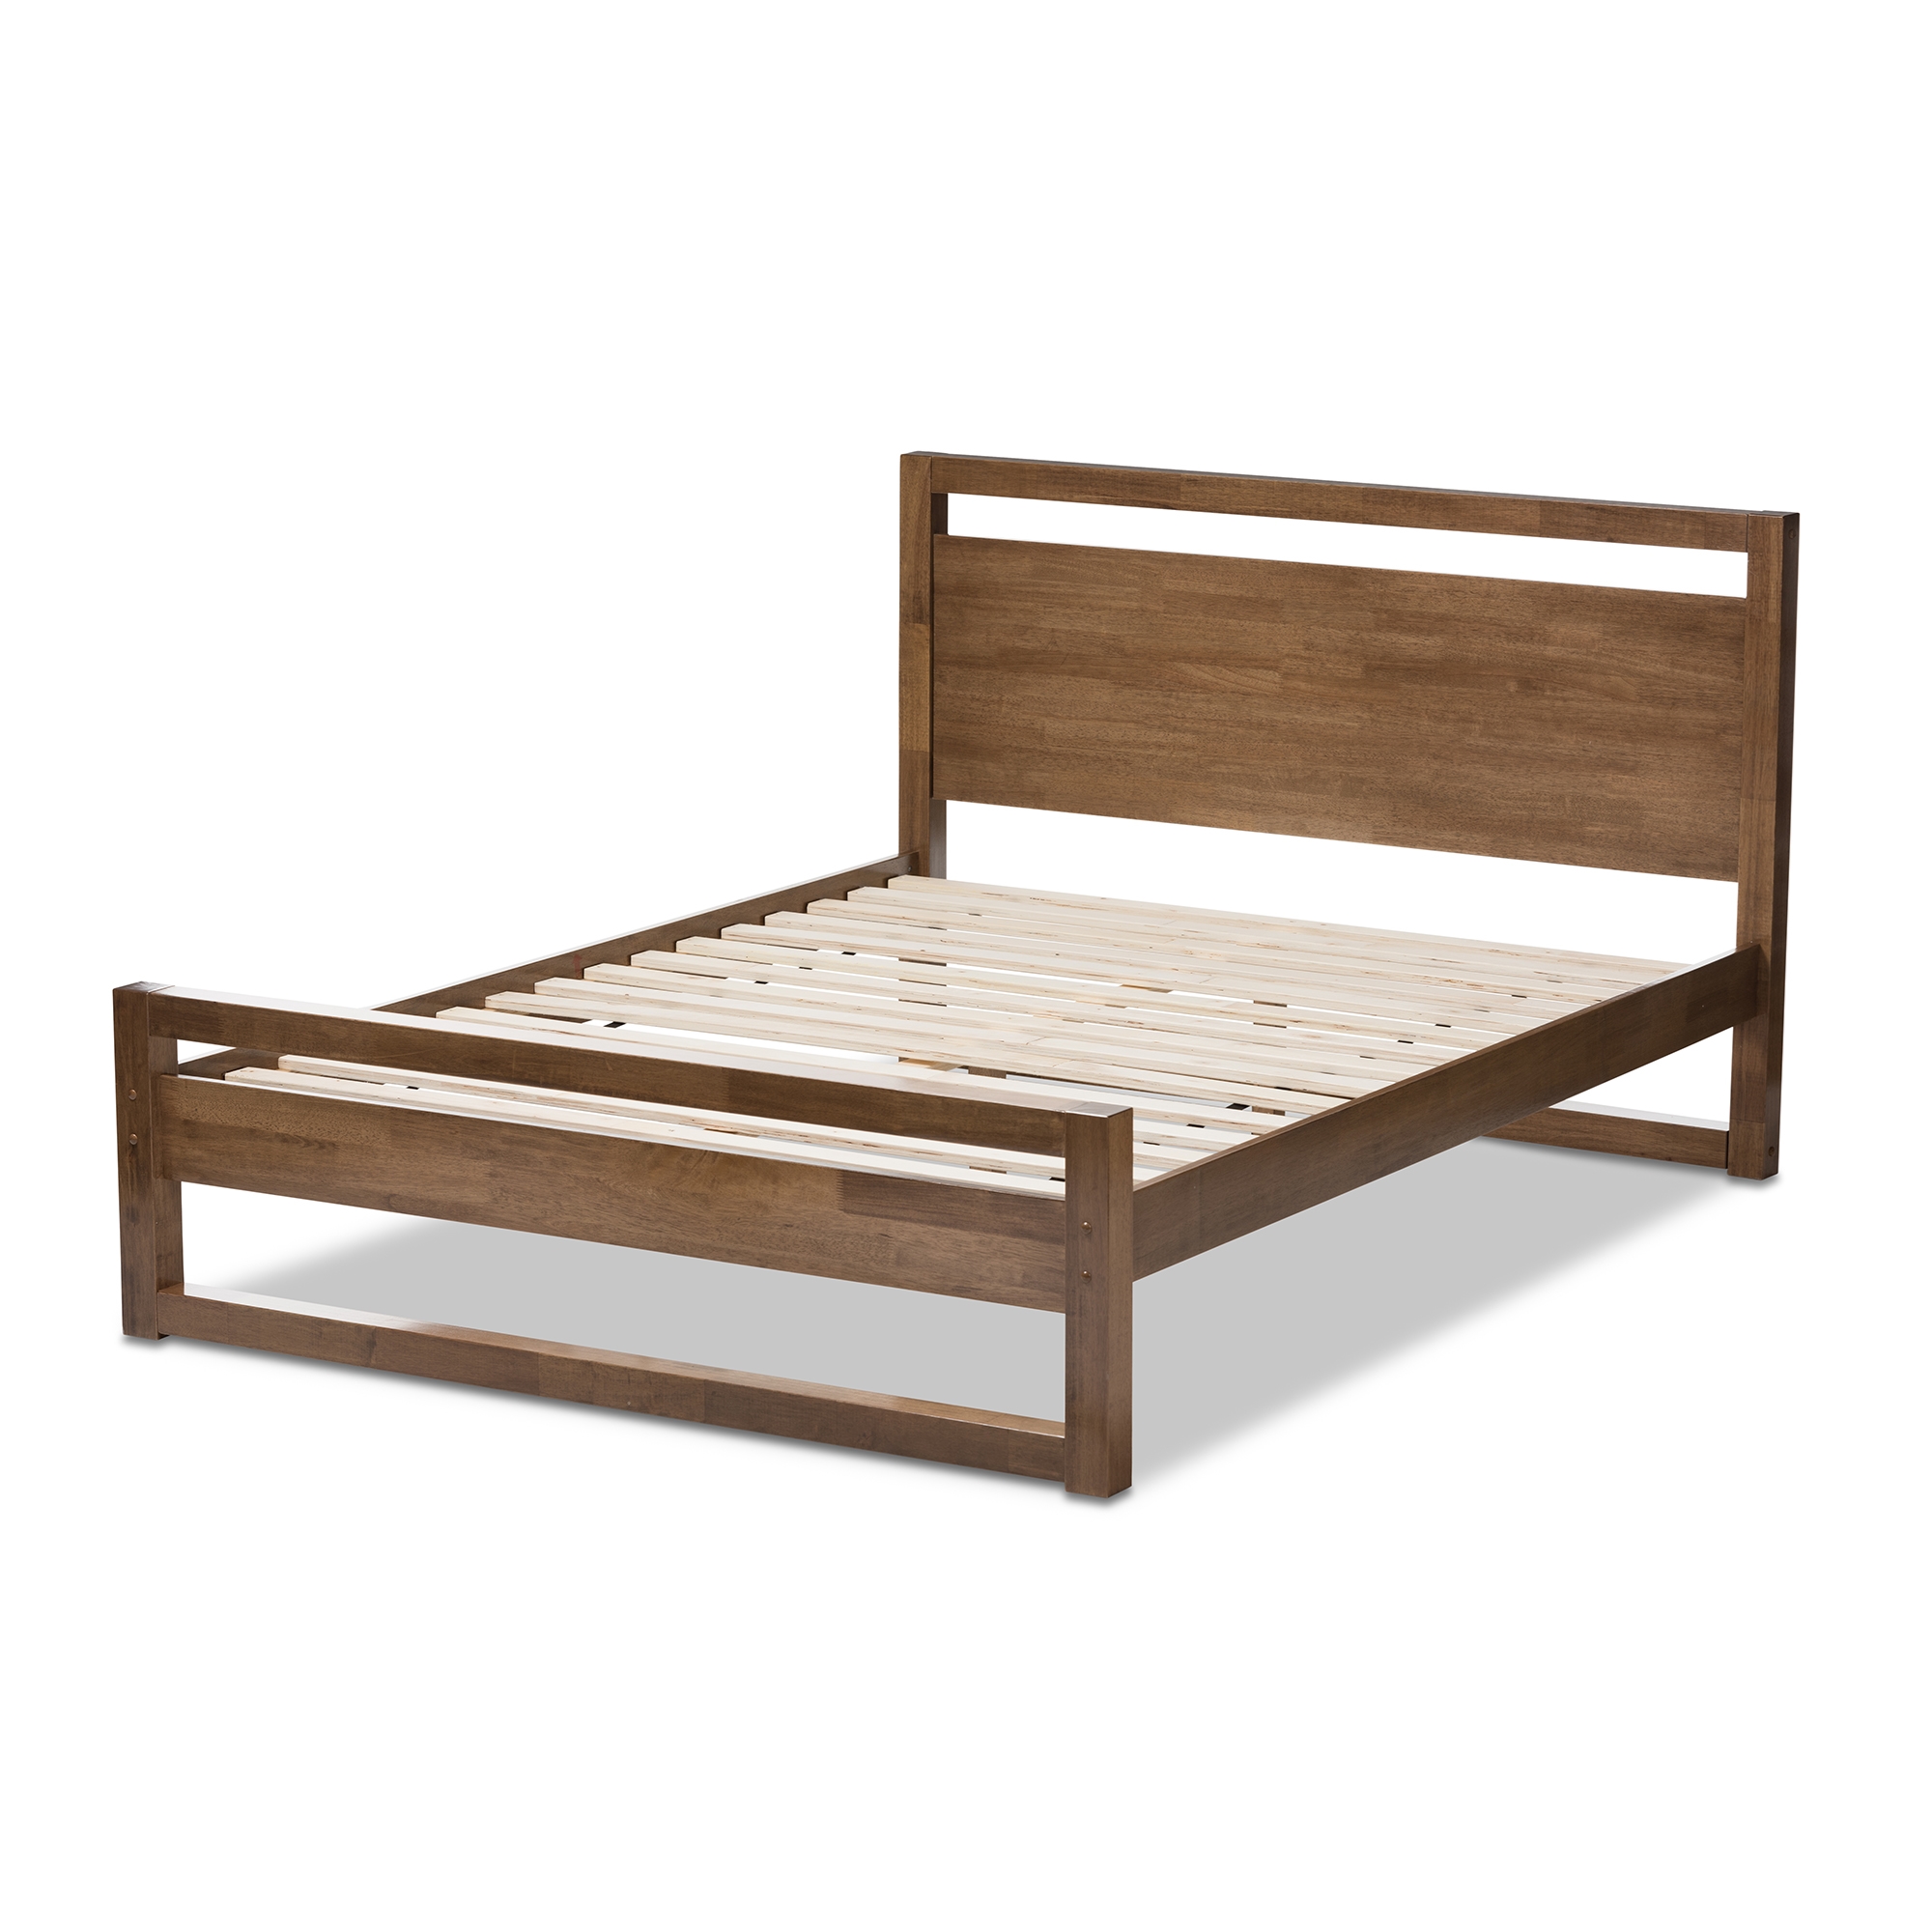 Wholesale king size bed | Wholesale bedroom furniture | Wholesale